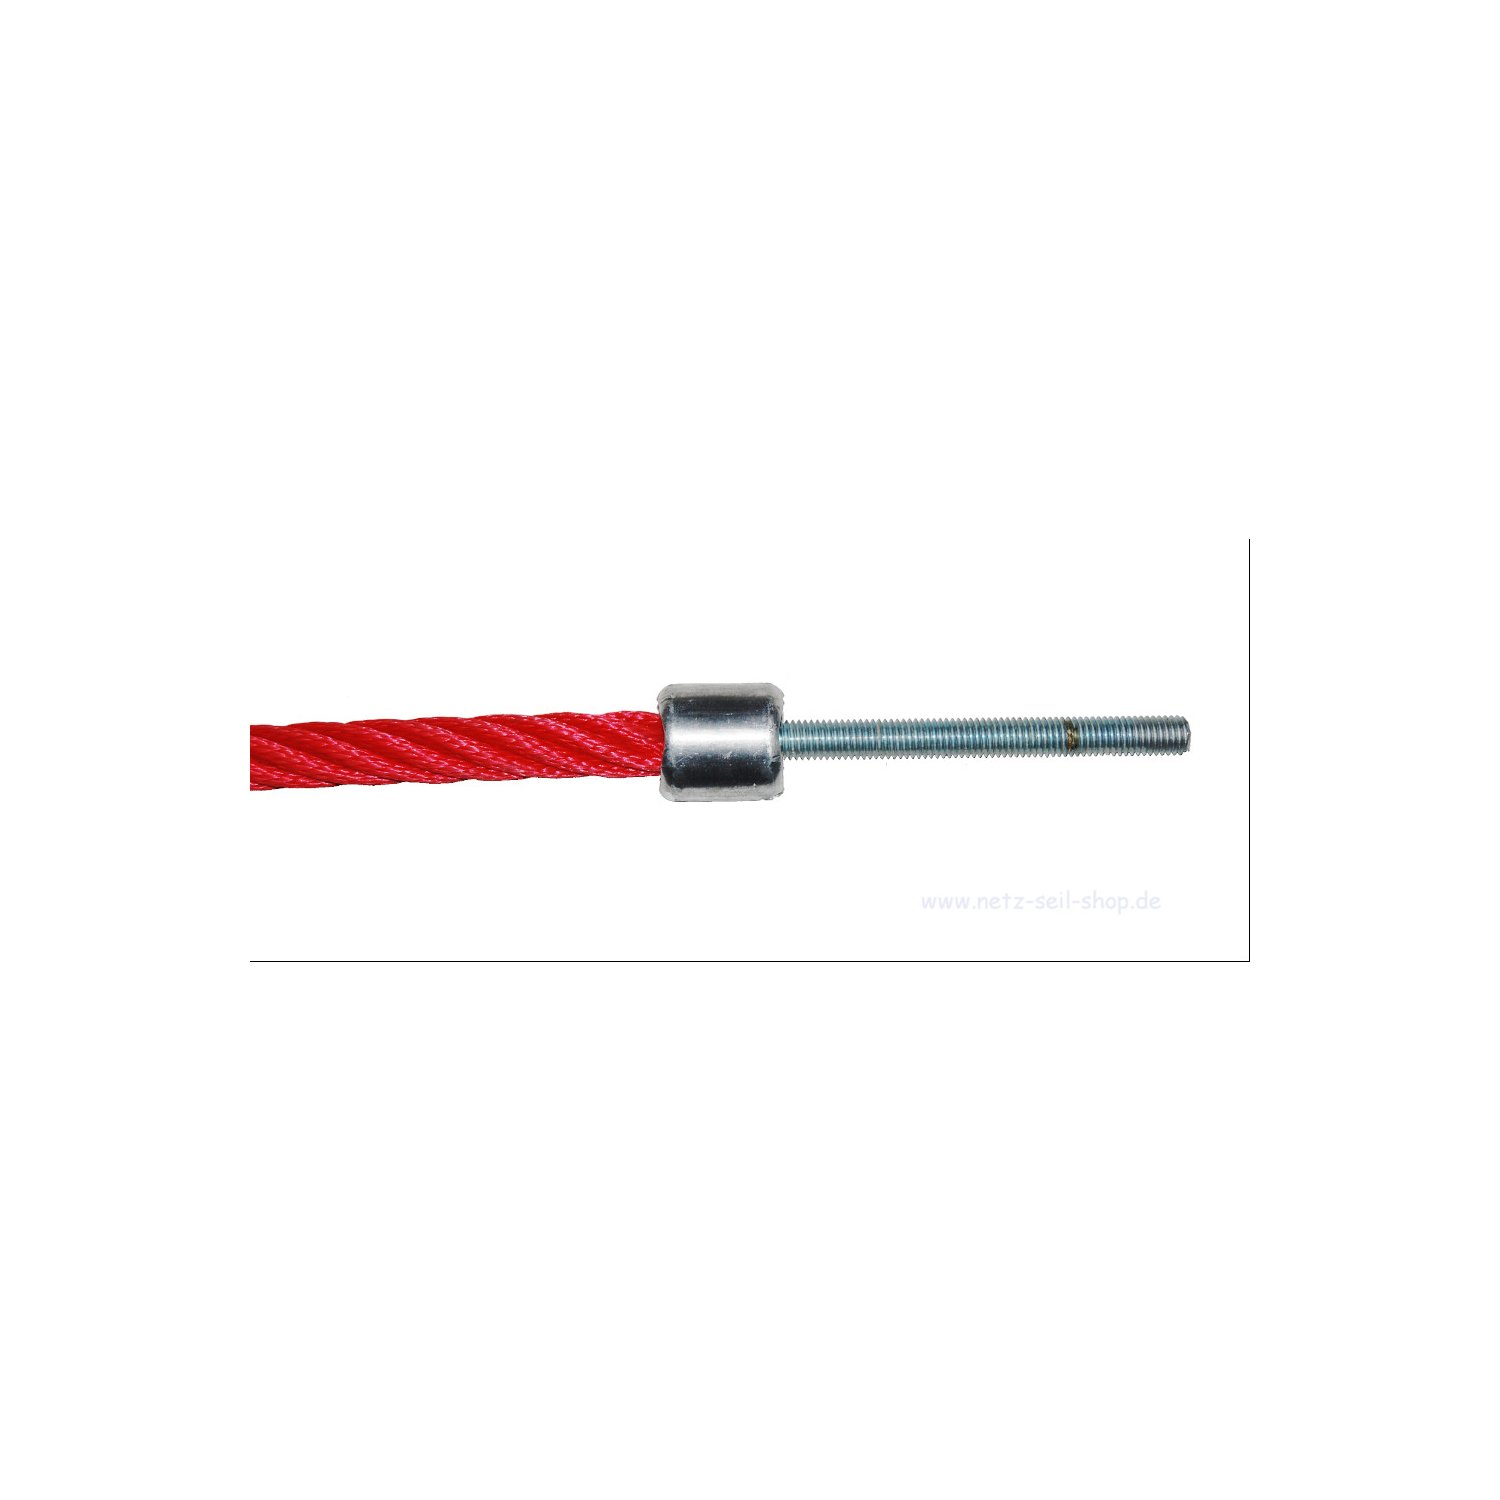 Threaded bolt M12 x 180 mm, galvanised, directly pressed [10,71 EUR]